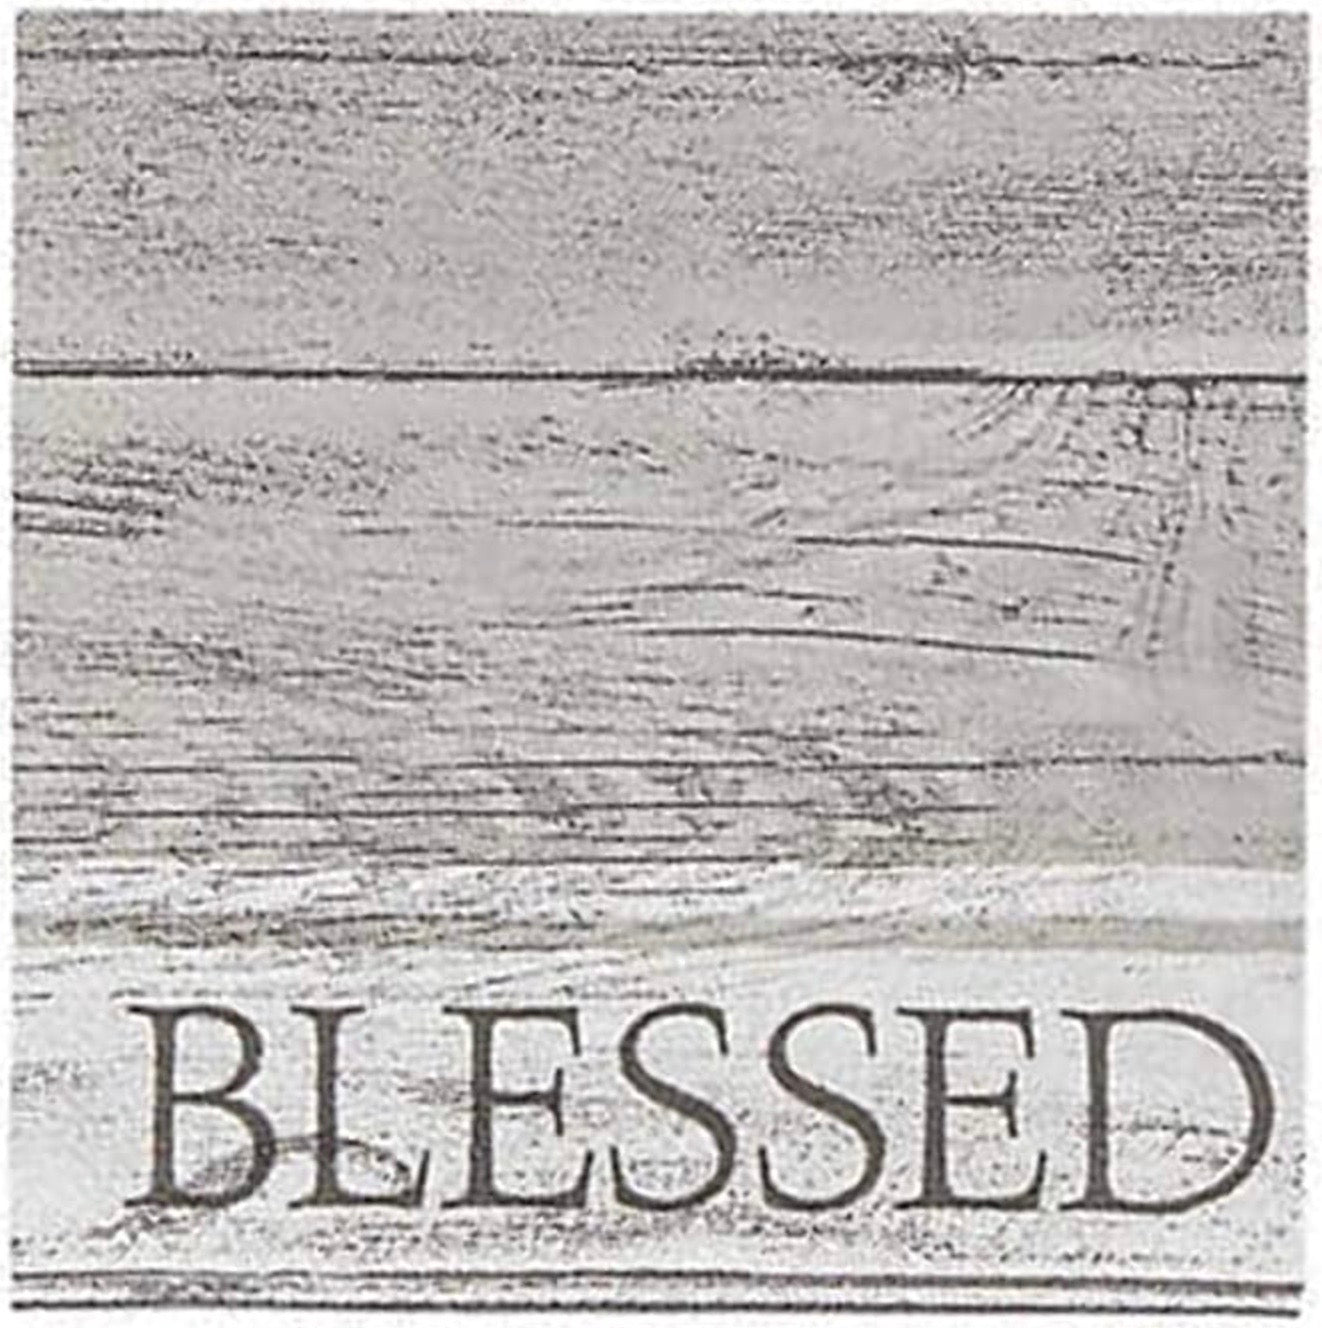 Blessed Wood Grain Cocktail Napkin (Set of 2)